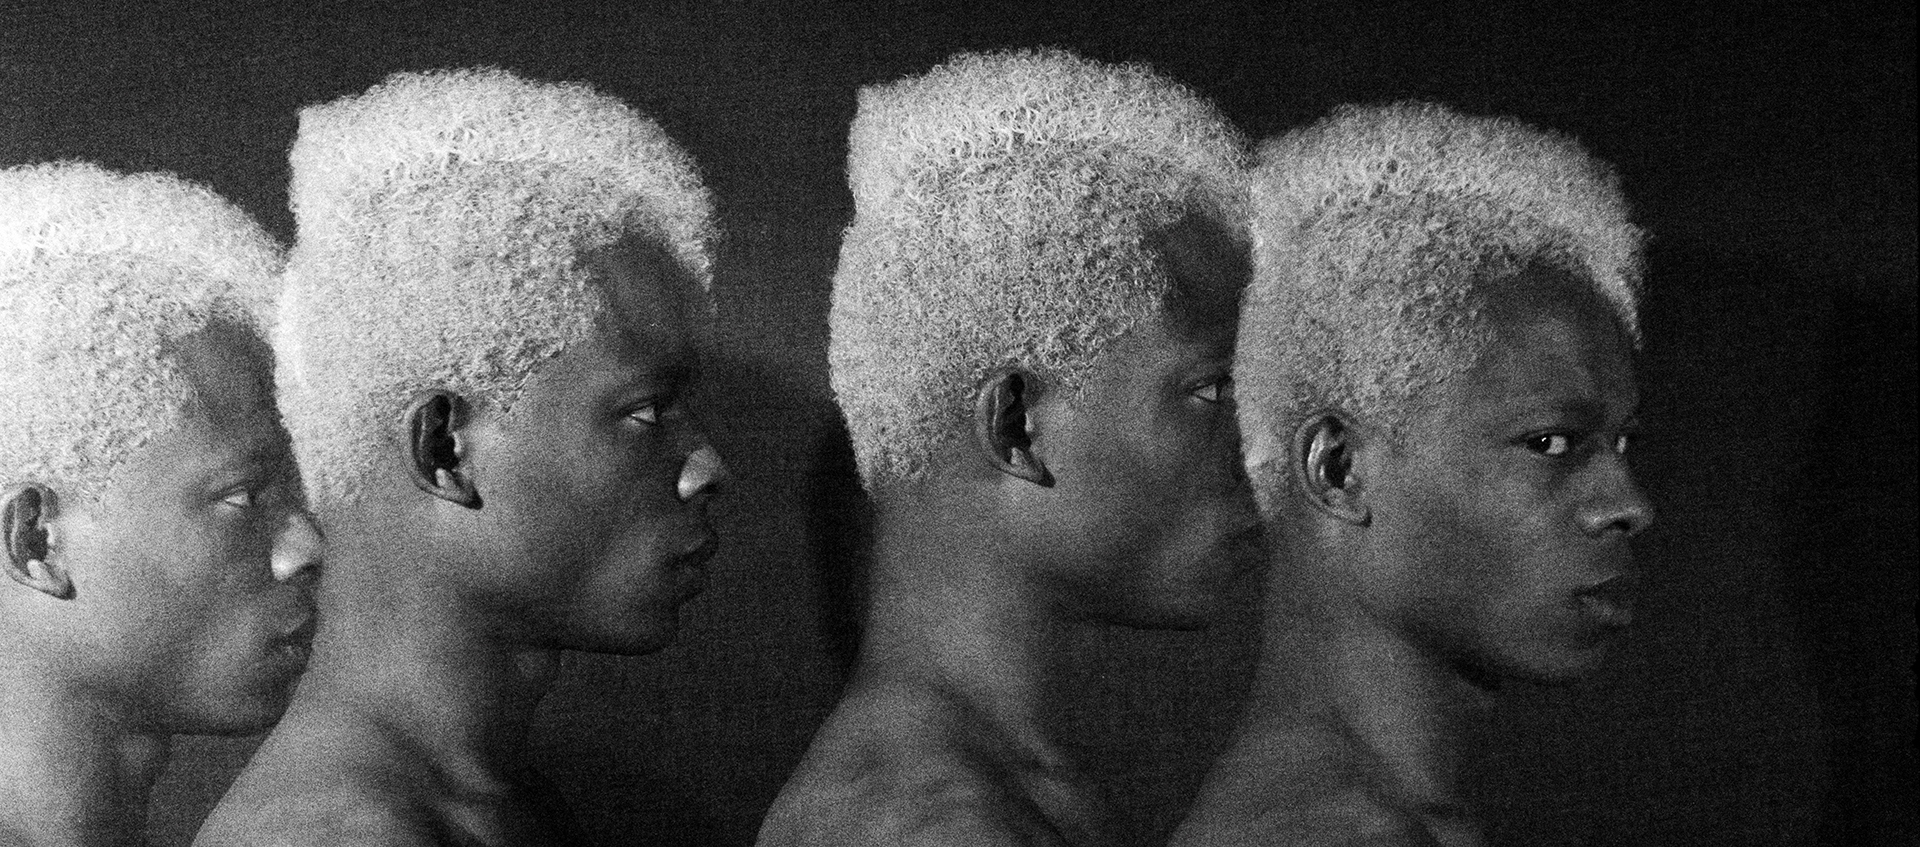 Photographic montage of repeated profile views of a young black male with white hair. In three he stares ahead; in the fourth he looks sideways at the camera.